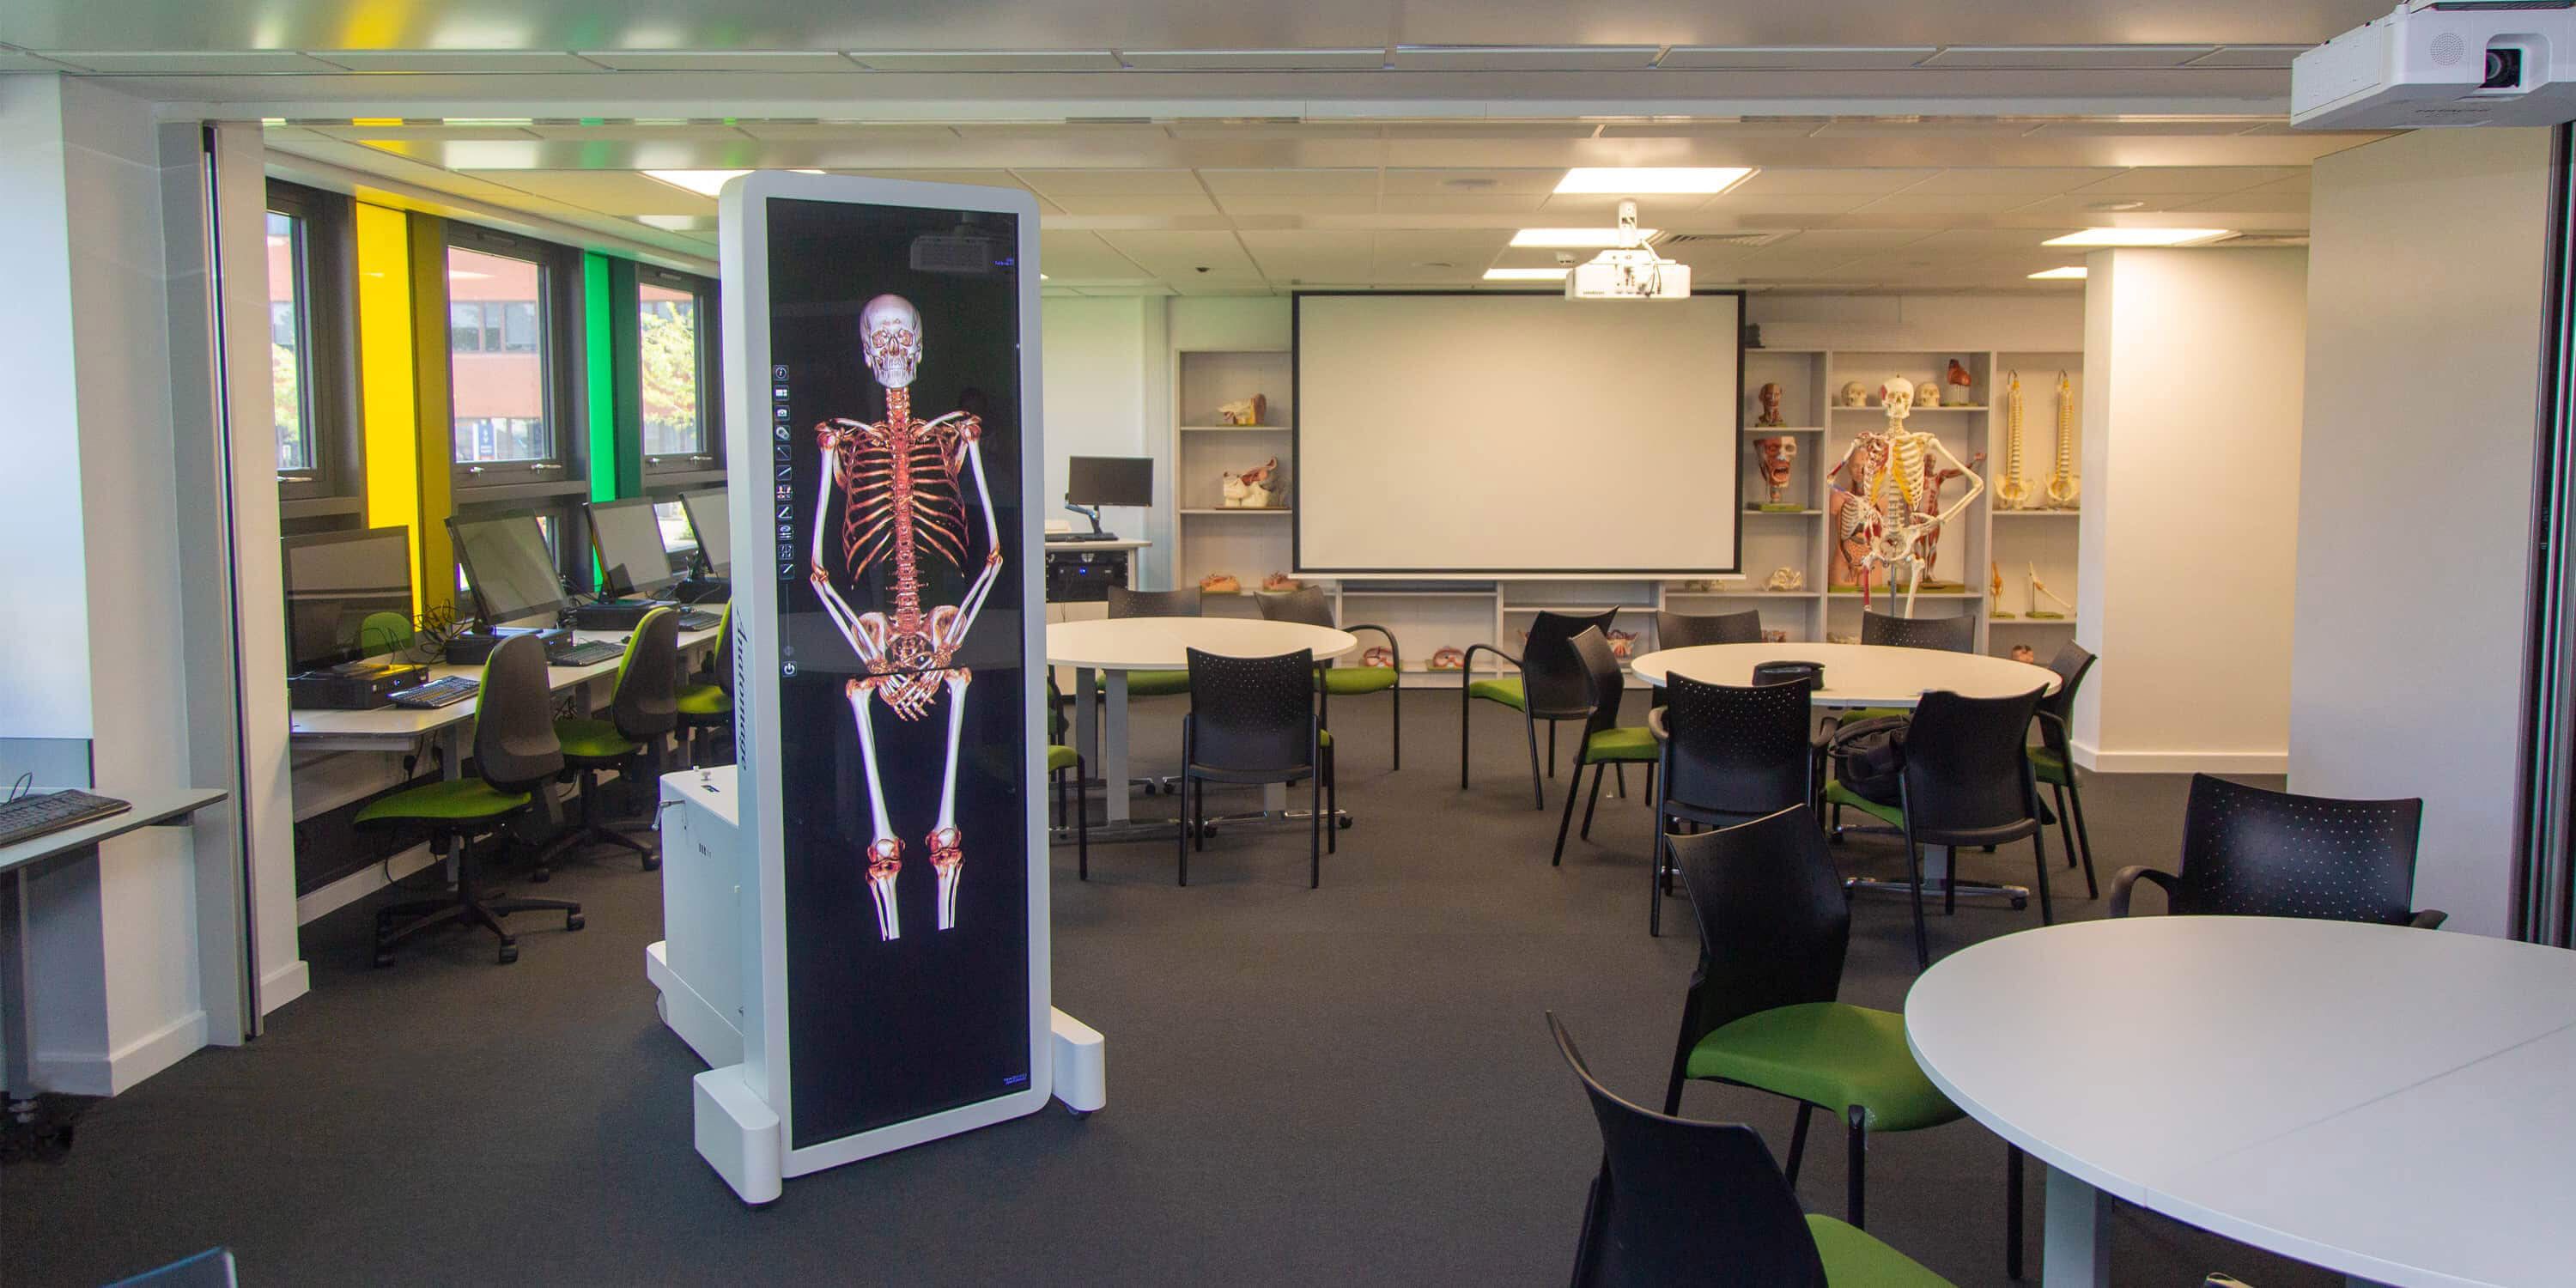 A wide shot of a Medical School Classroom featuring a display board with an anatomical model